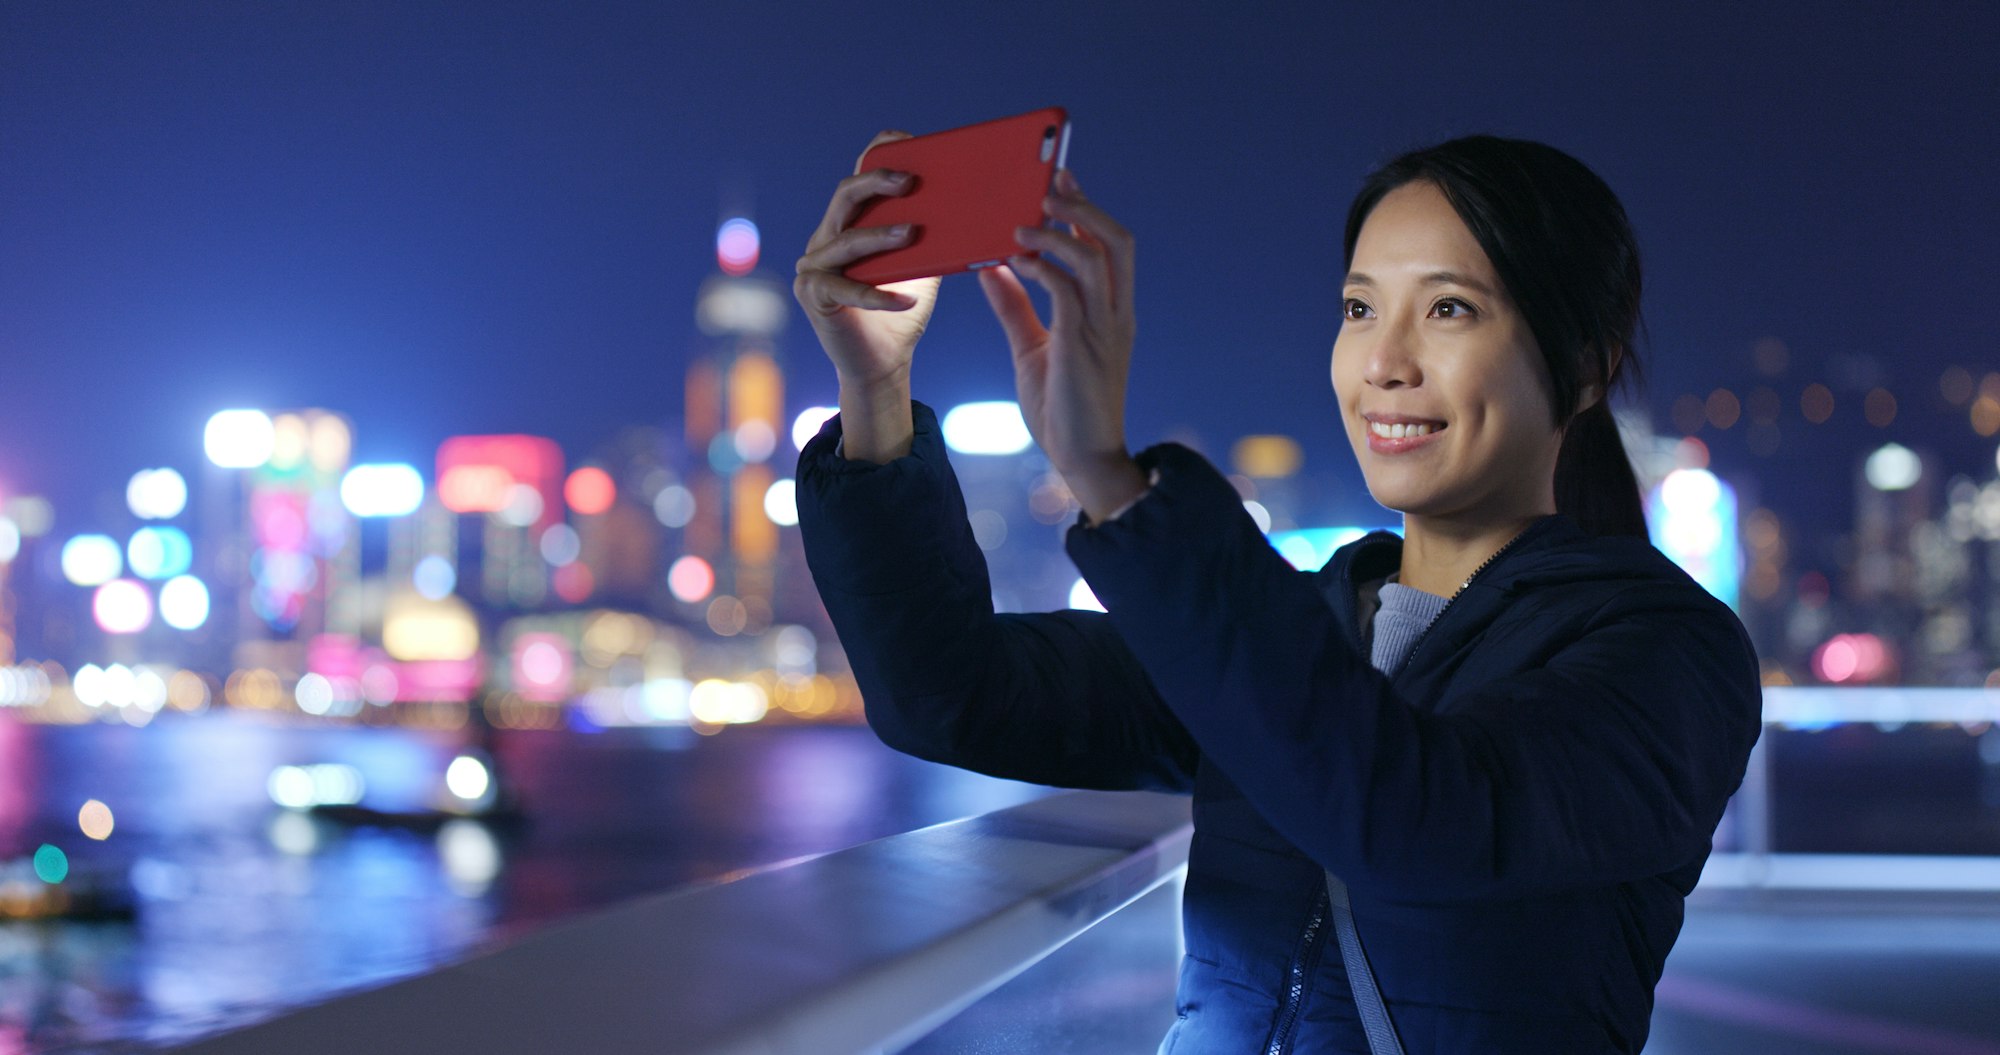 Woman take photo on cellphone at night